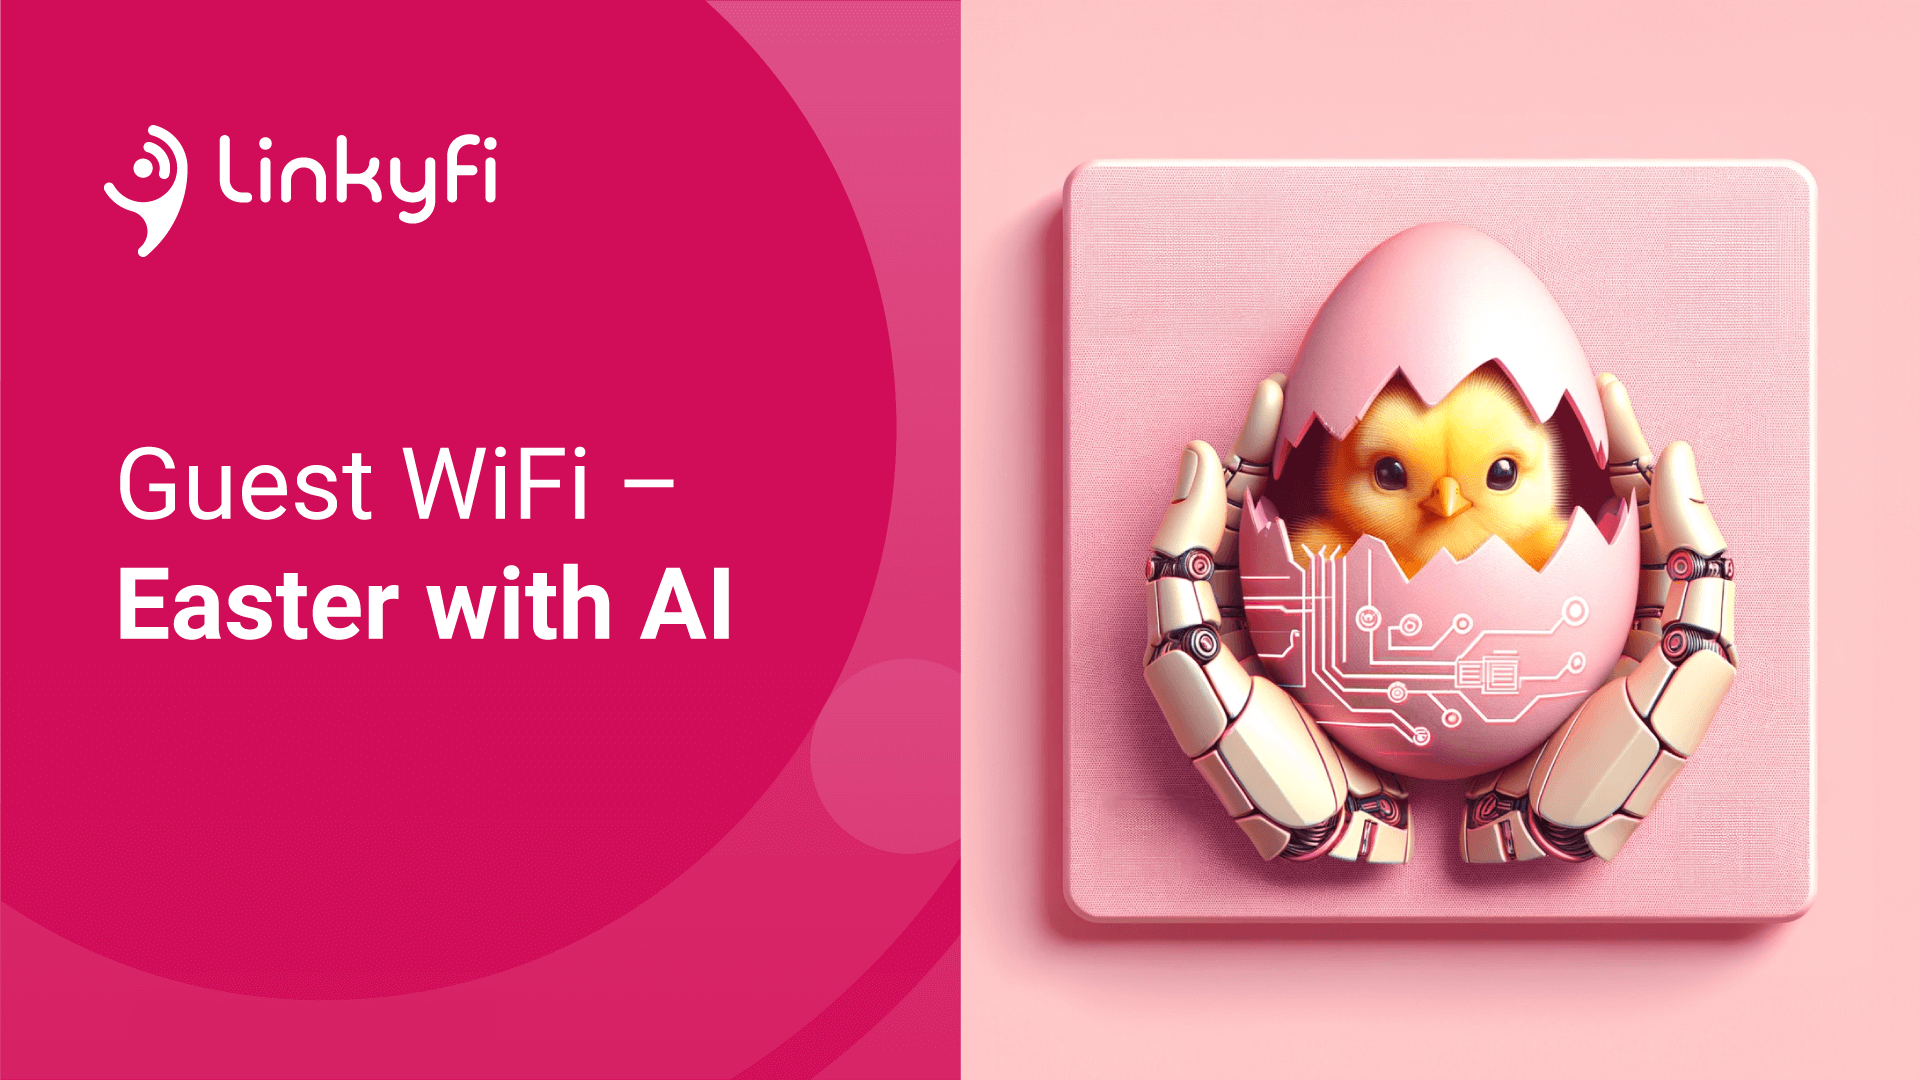 Guest WiFi - Easter with AI